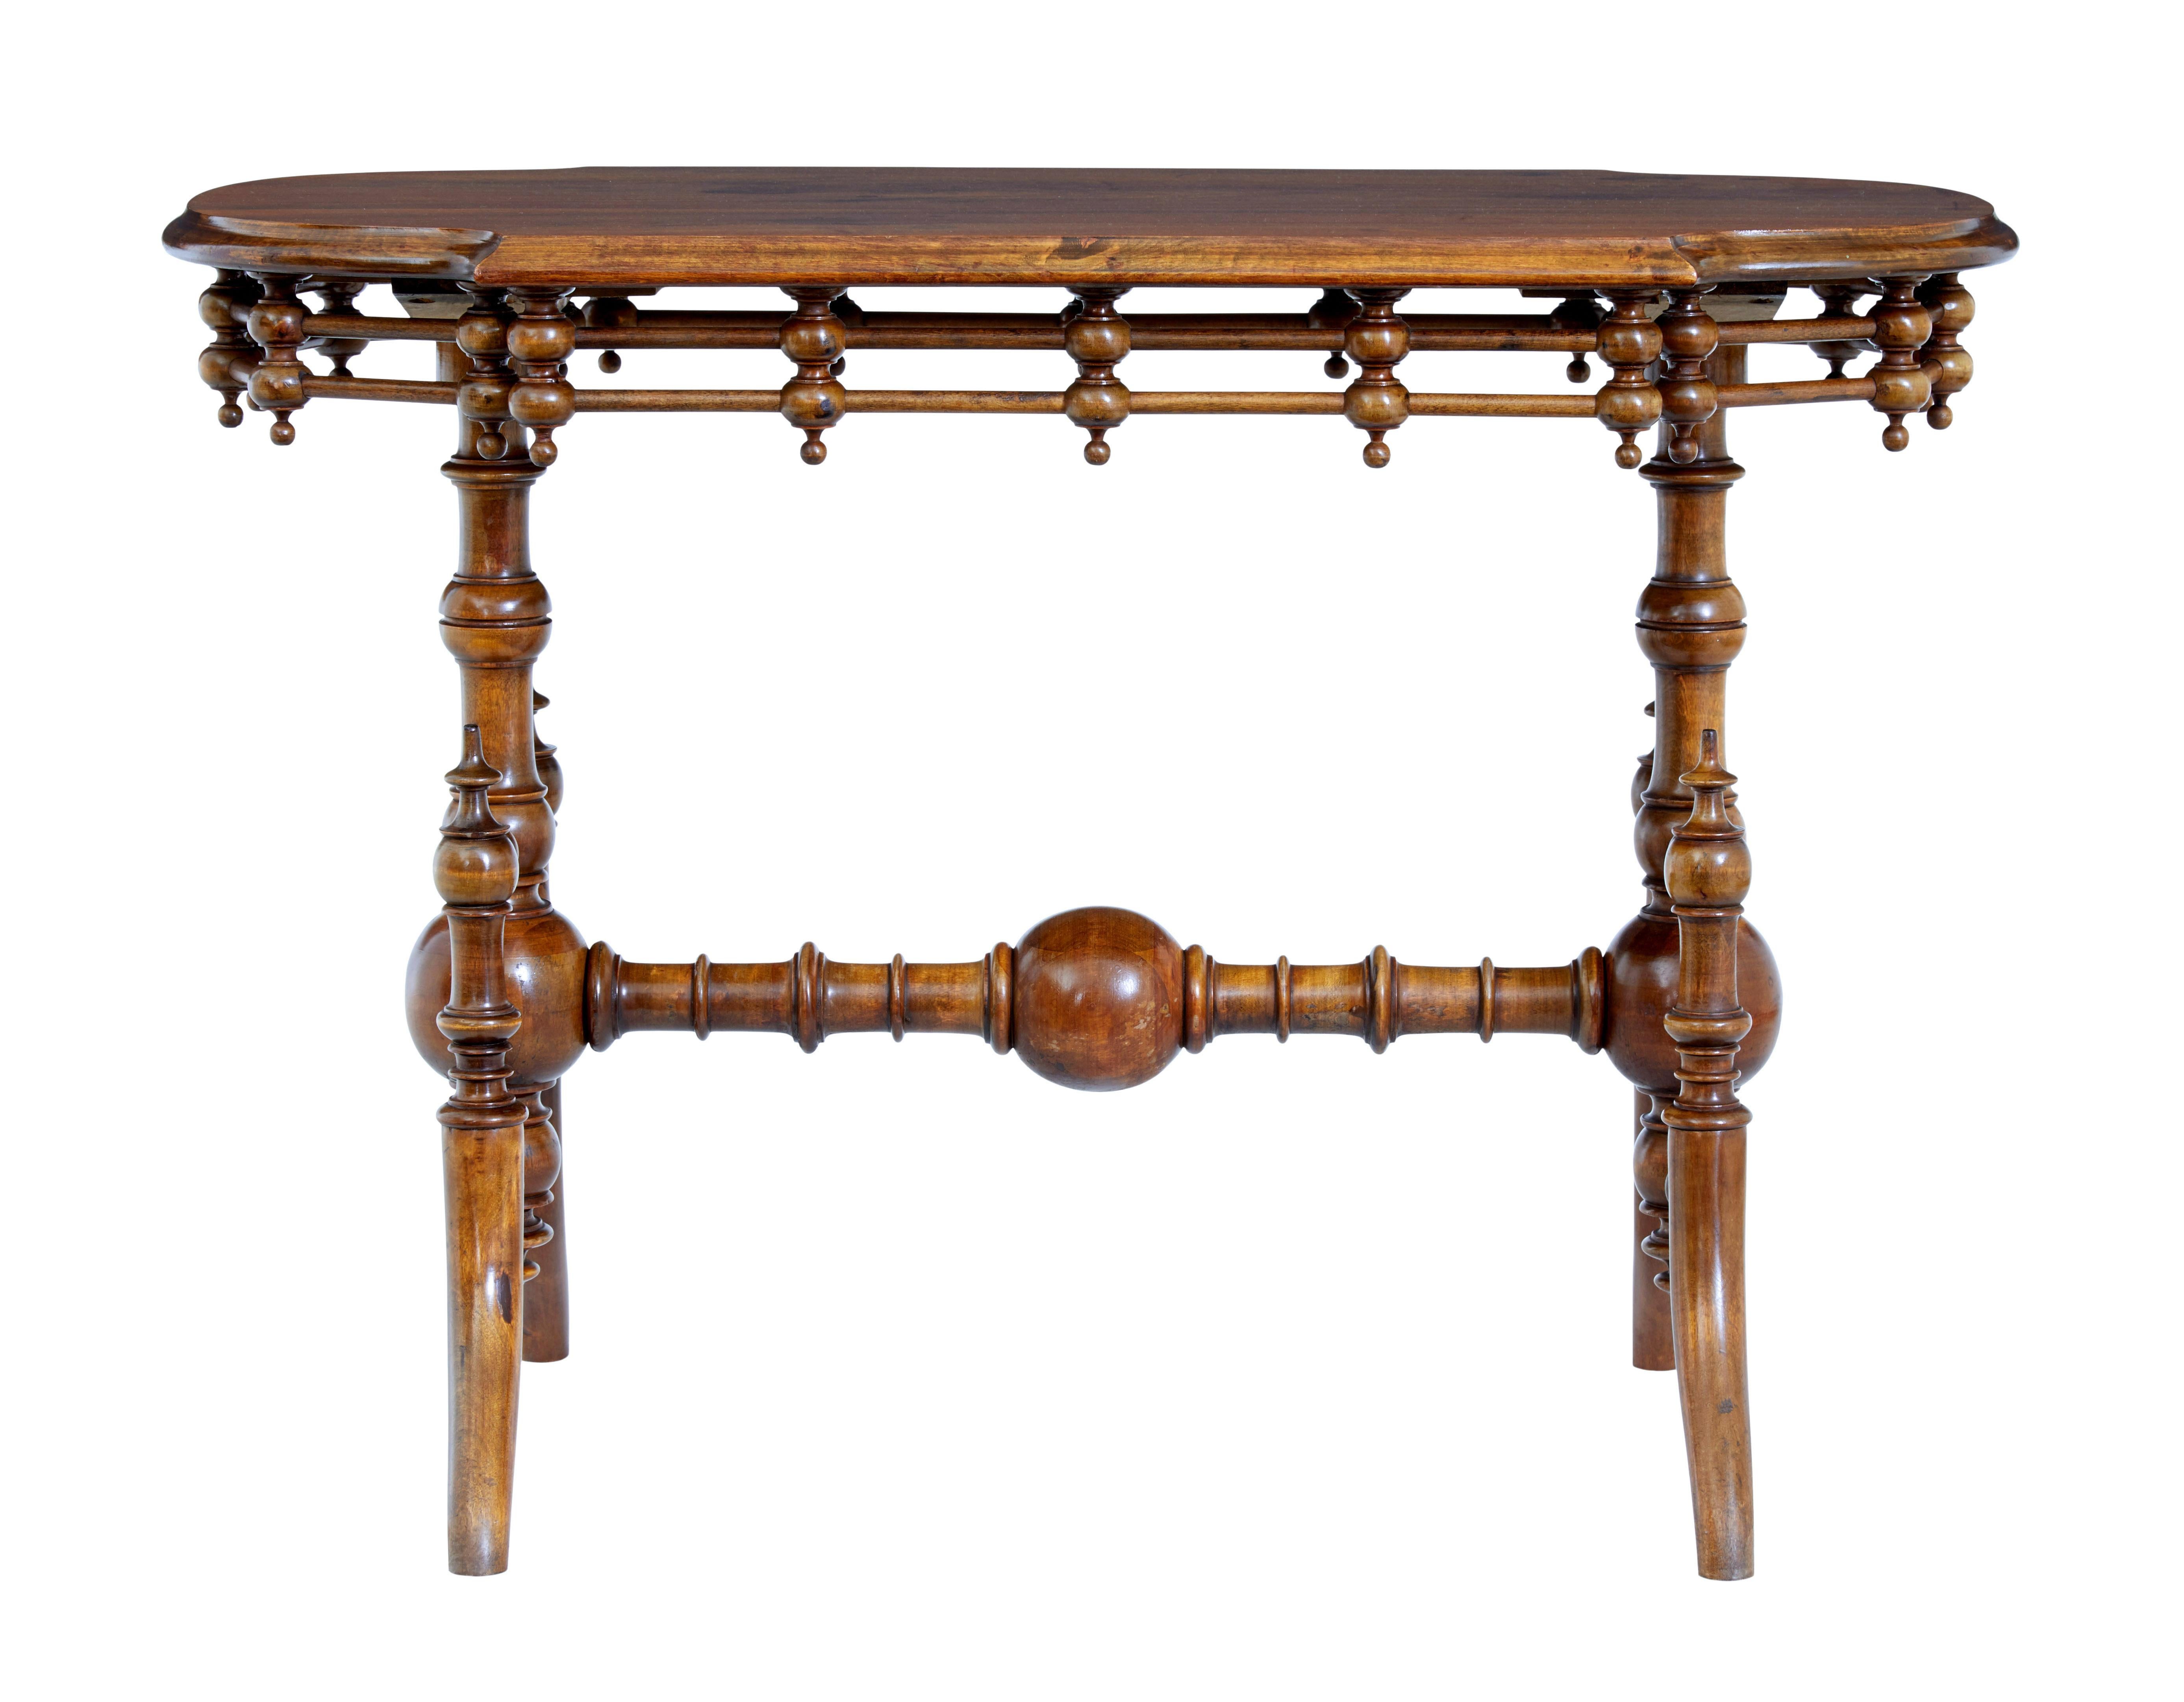 19th century Aesthetic Movement walnut table circa 1890.

Beautiful shaped and turned Aesthetic Movement inspired side/hall table.

Shaped walnut top with an applied frieze of turnings and dowels. Supported by 2 turned bulbous columns and